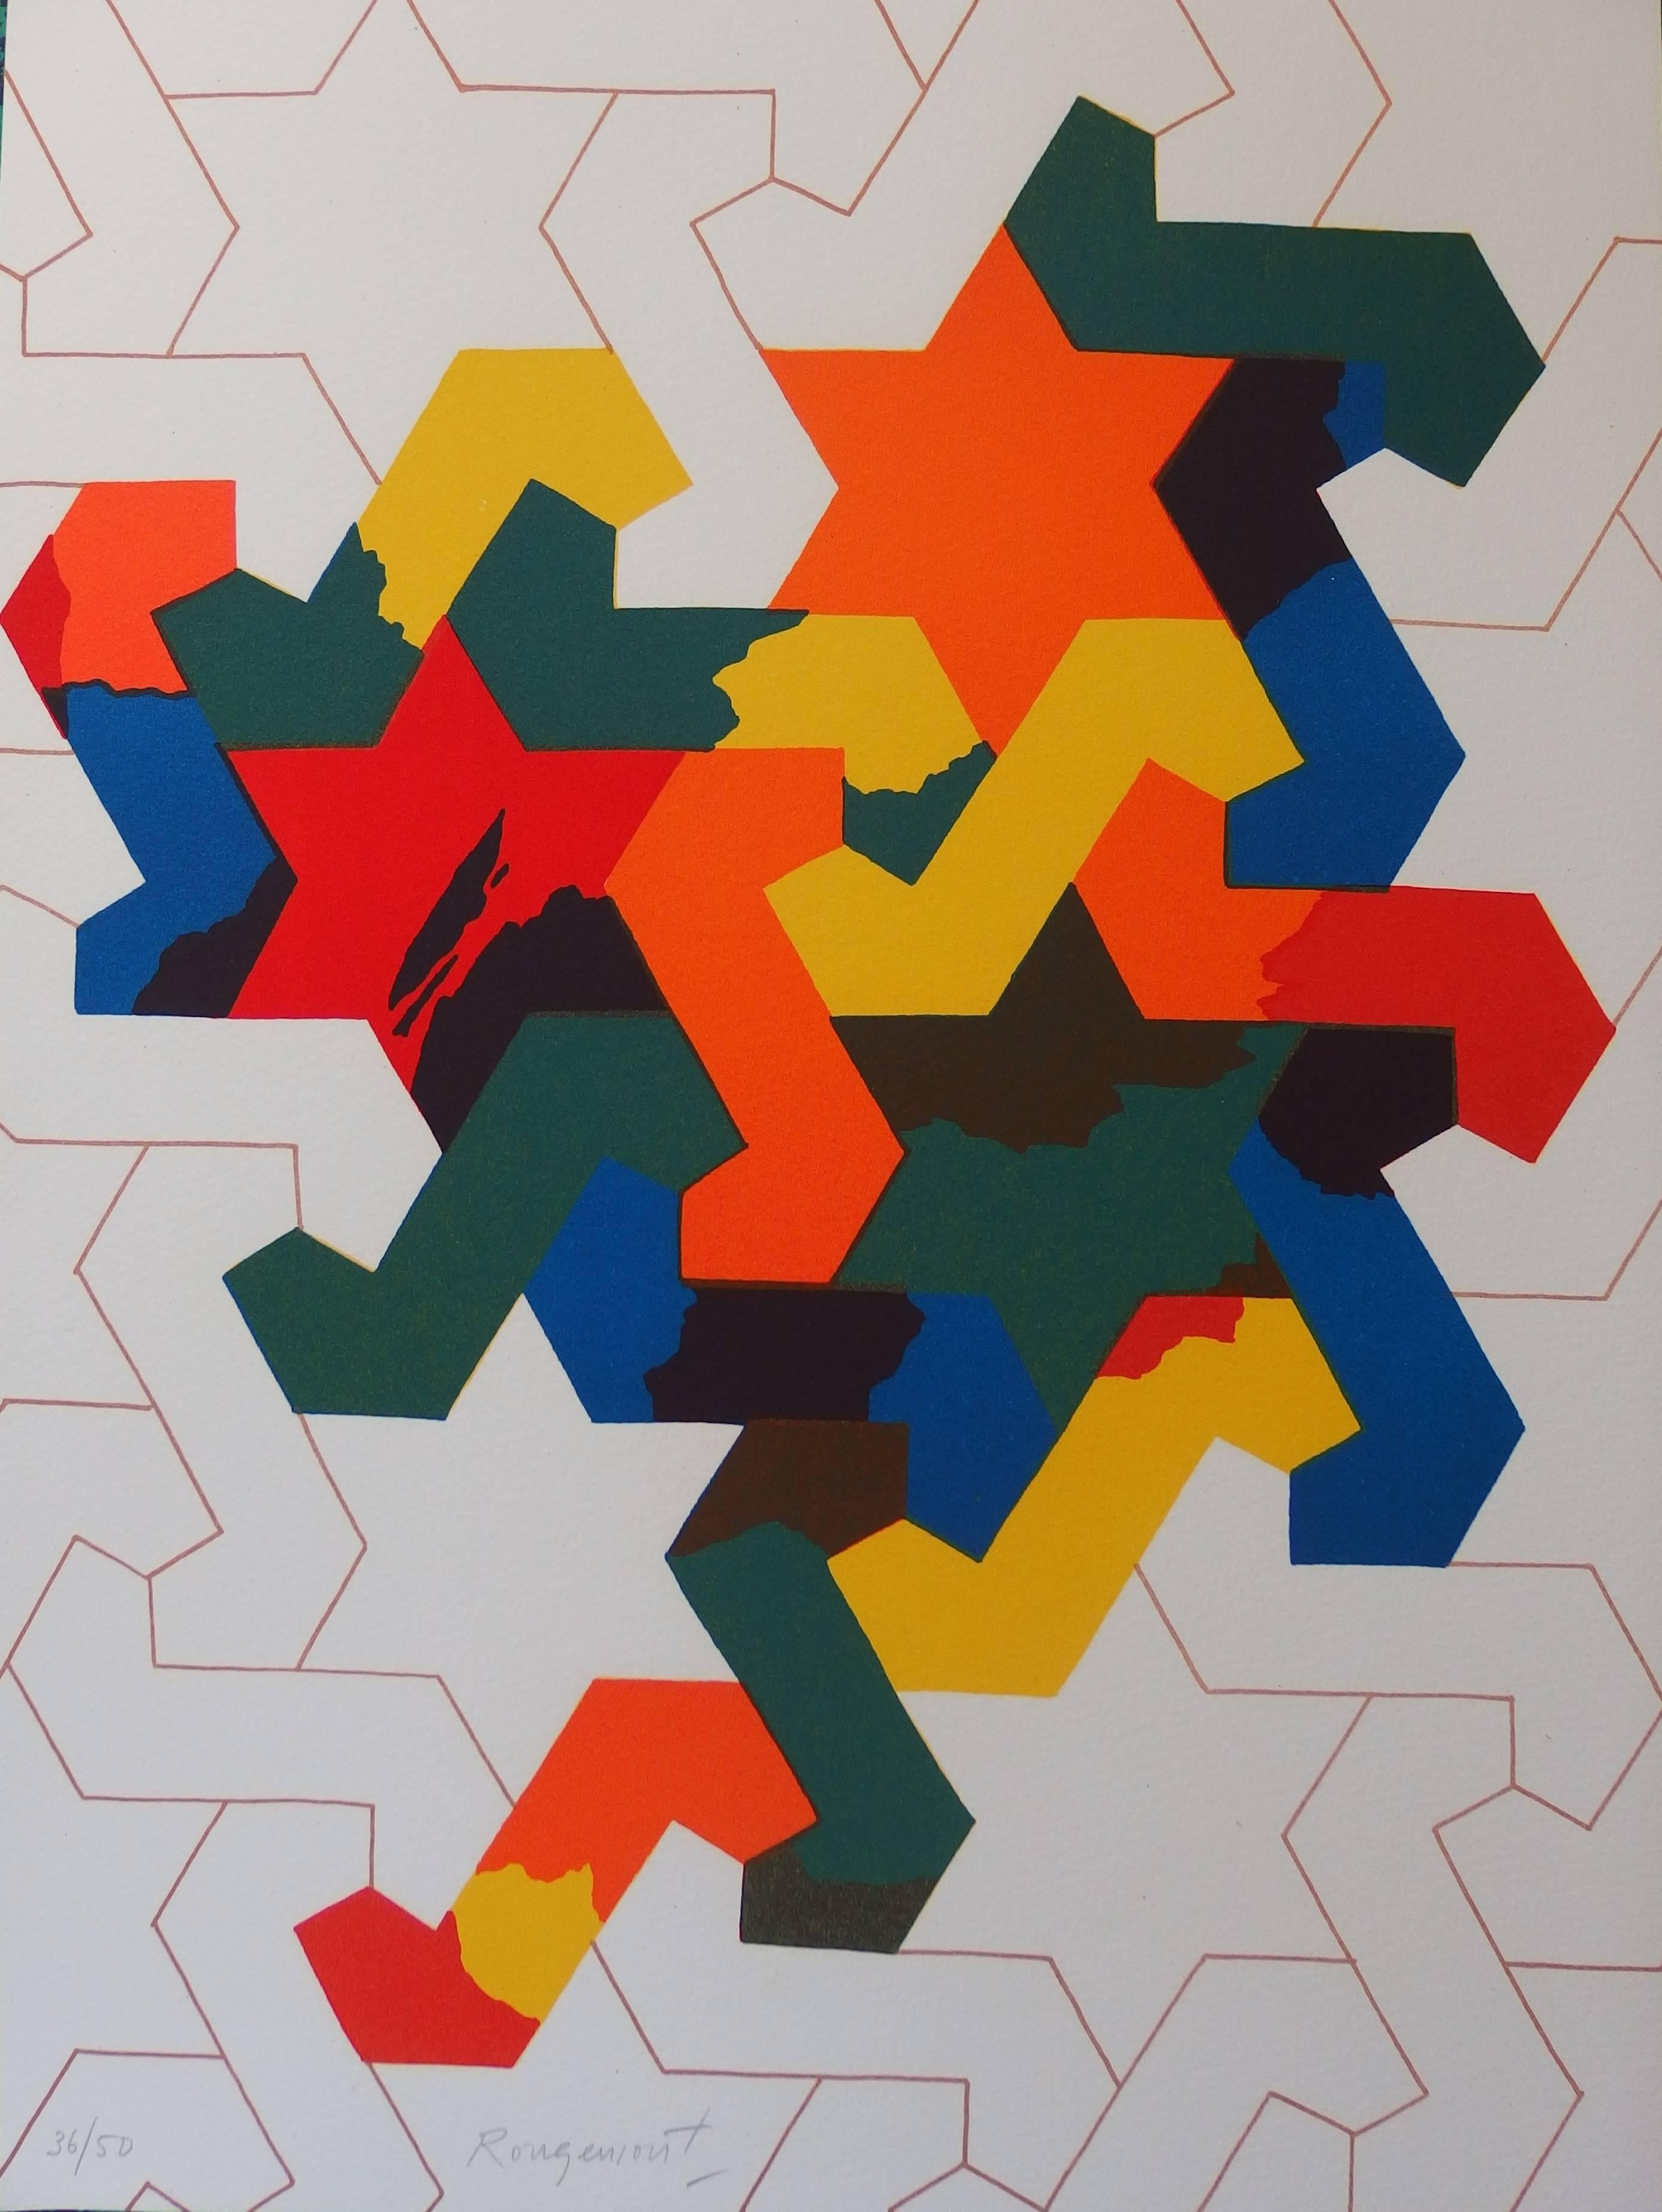 Guy de Rougemont Abstract Print - Geometrical stars - Original handsigned lithograph - 50 copies